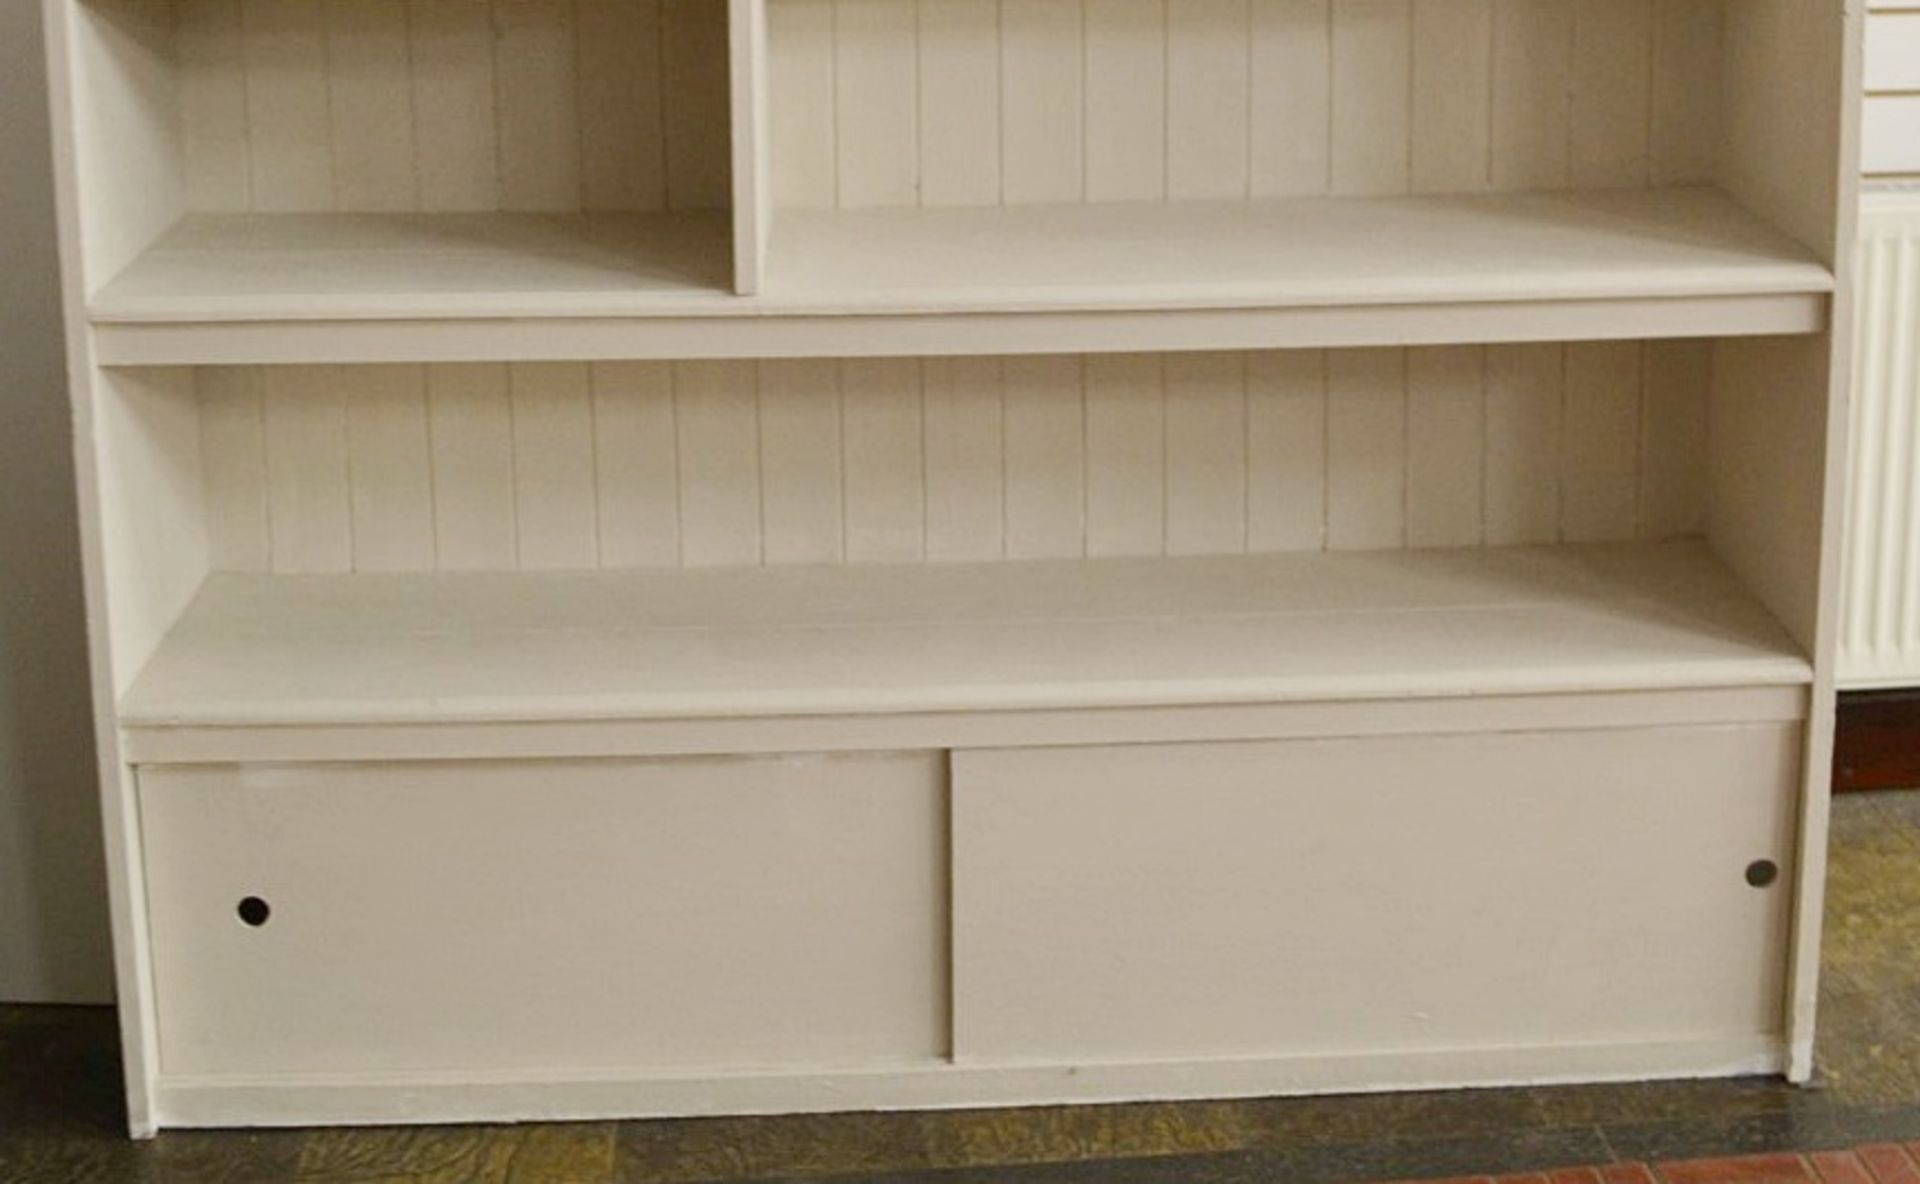 1 x Large 2-Metre Tall Painted Dresser Unit With 2 Sliding Door Storage And Paneled Back - Image 2 of 4